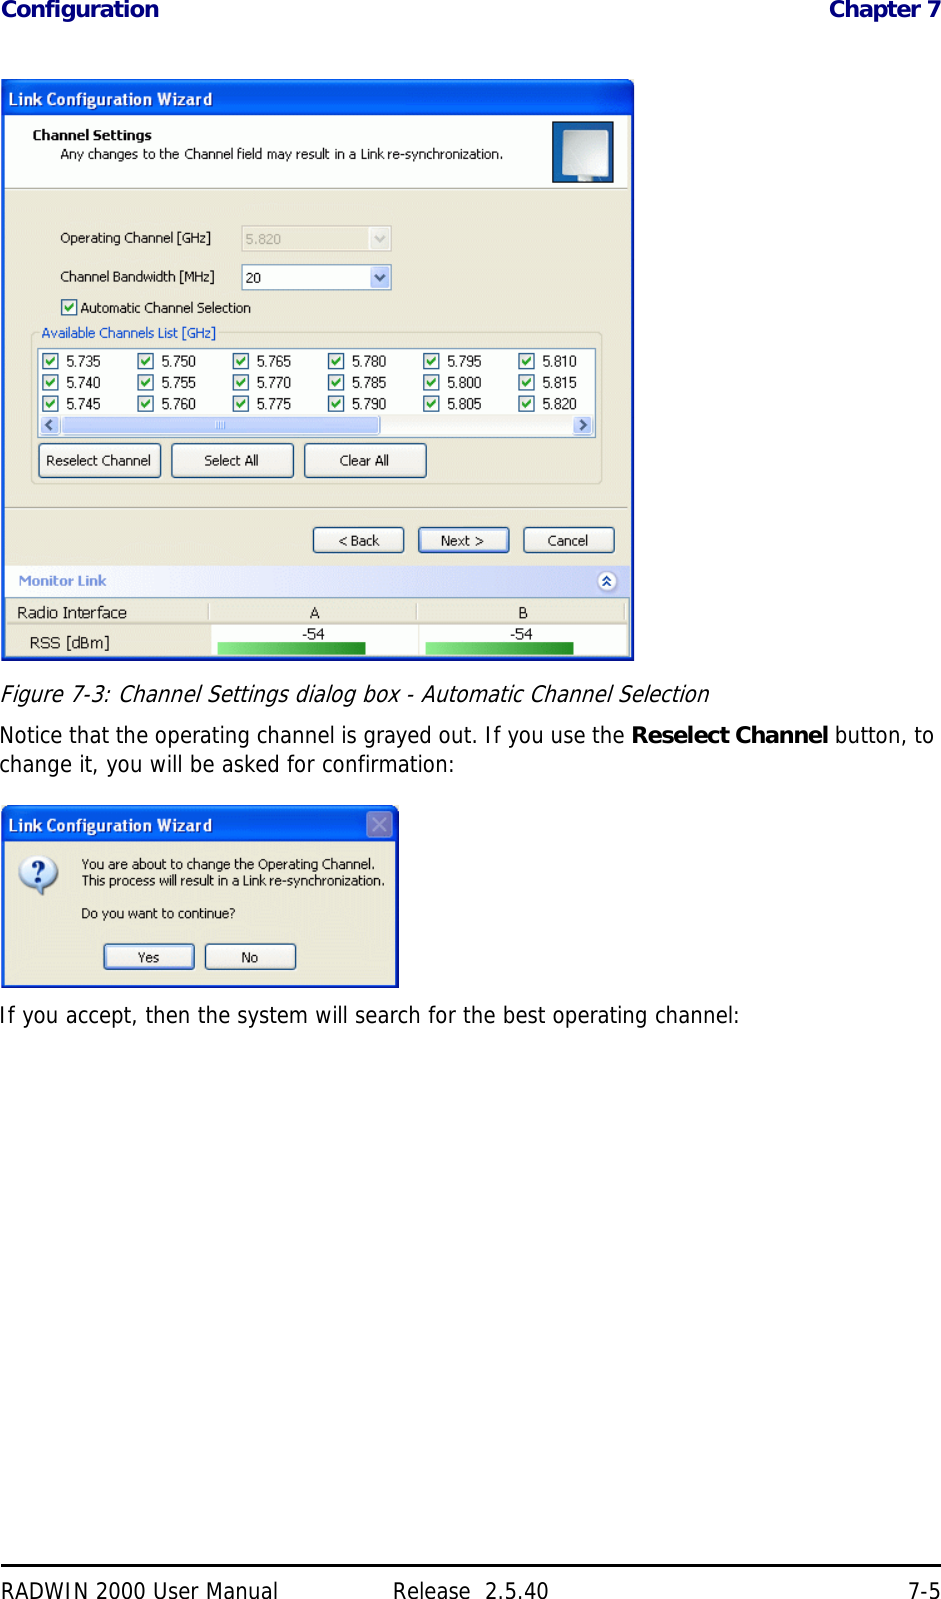 Configuration Chapter 7RADWIN 2000 User Manual Release  2.5.40 7-5Figure 7-3: Channel Settings dialog box - Automatic Channel SelectionNotice that the operating channel is grayed out. If you use the Reselect Channel button, to change it, you will be asked for confirmation:If you accept, then the system will search for the best operating channel: